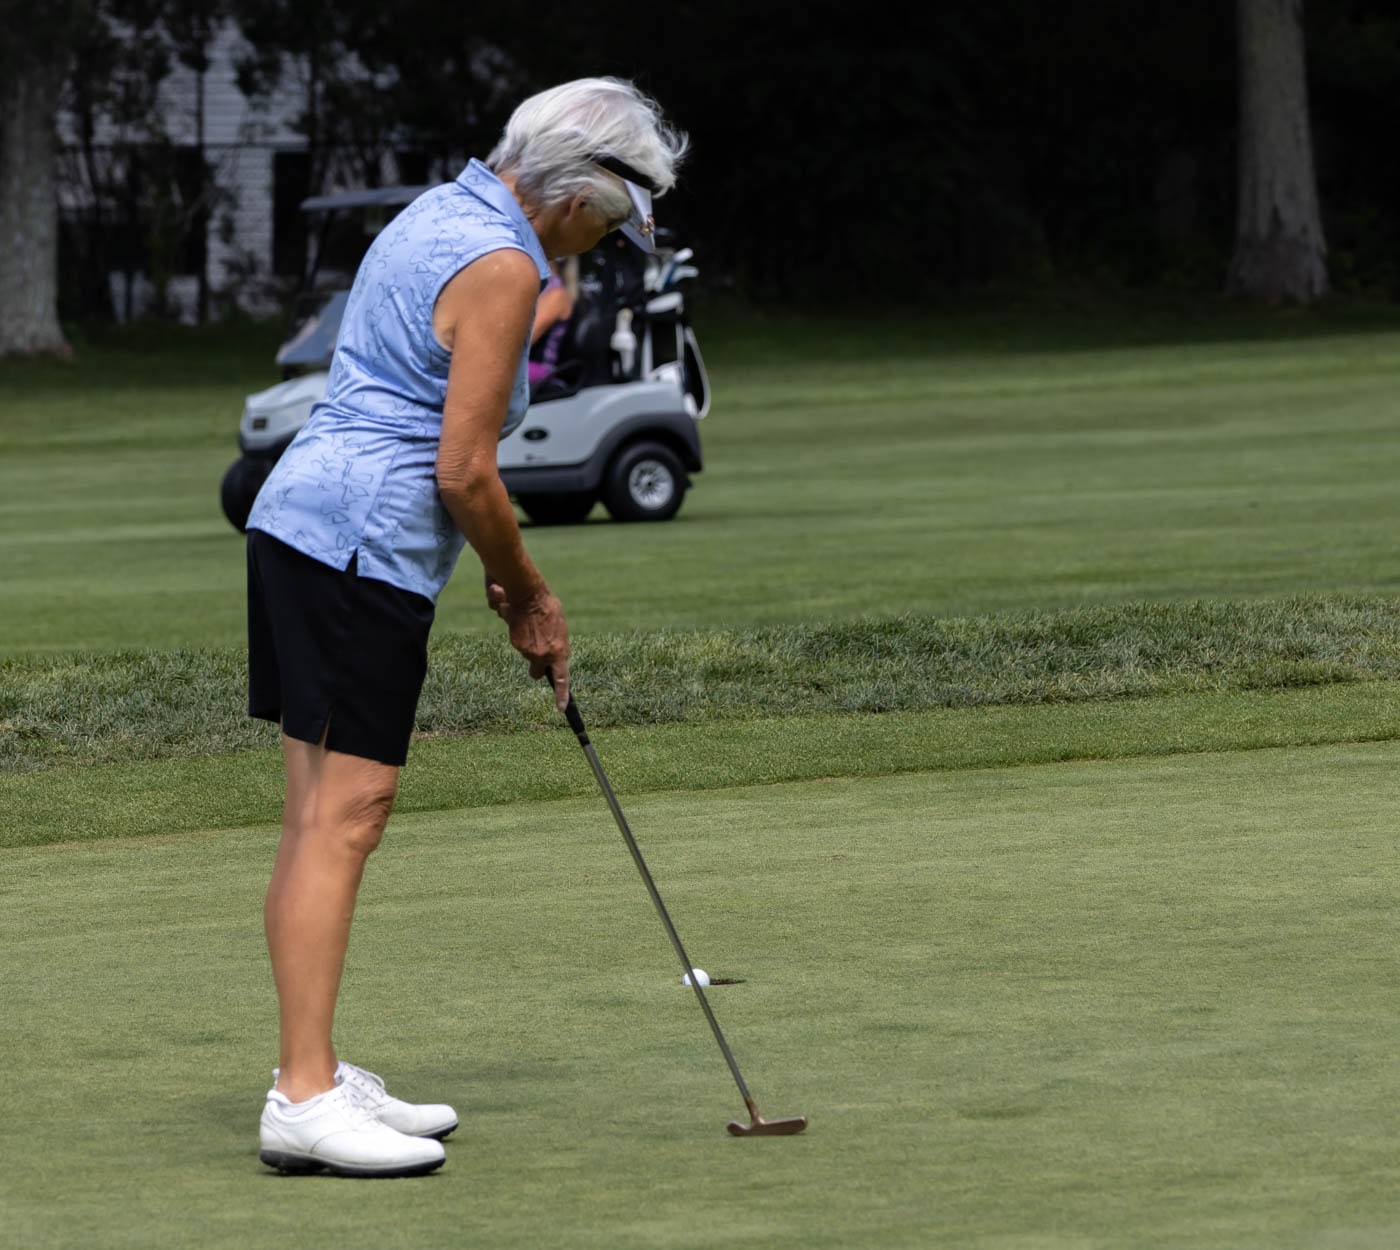 Country-Club-Of-New-Bedford FB-2023-Womens-FB-Gallery August-2023-Country-Club-Of-New-Bedford-FB-2023-Womens-FB-Gallery August-2023-Womens-FB-Gallery-Thursday-Photos-Image-33